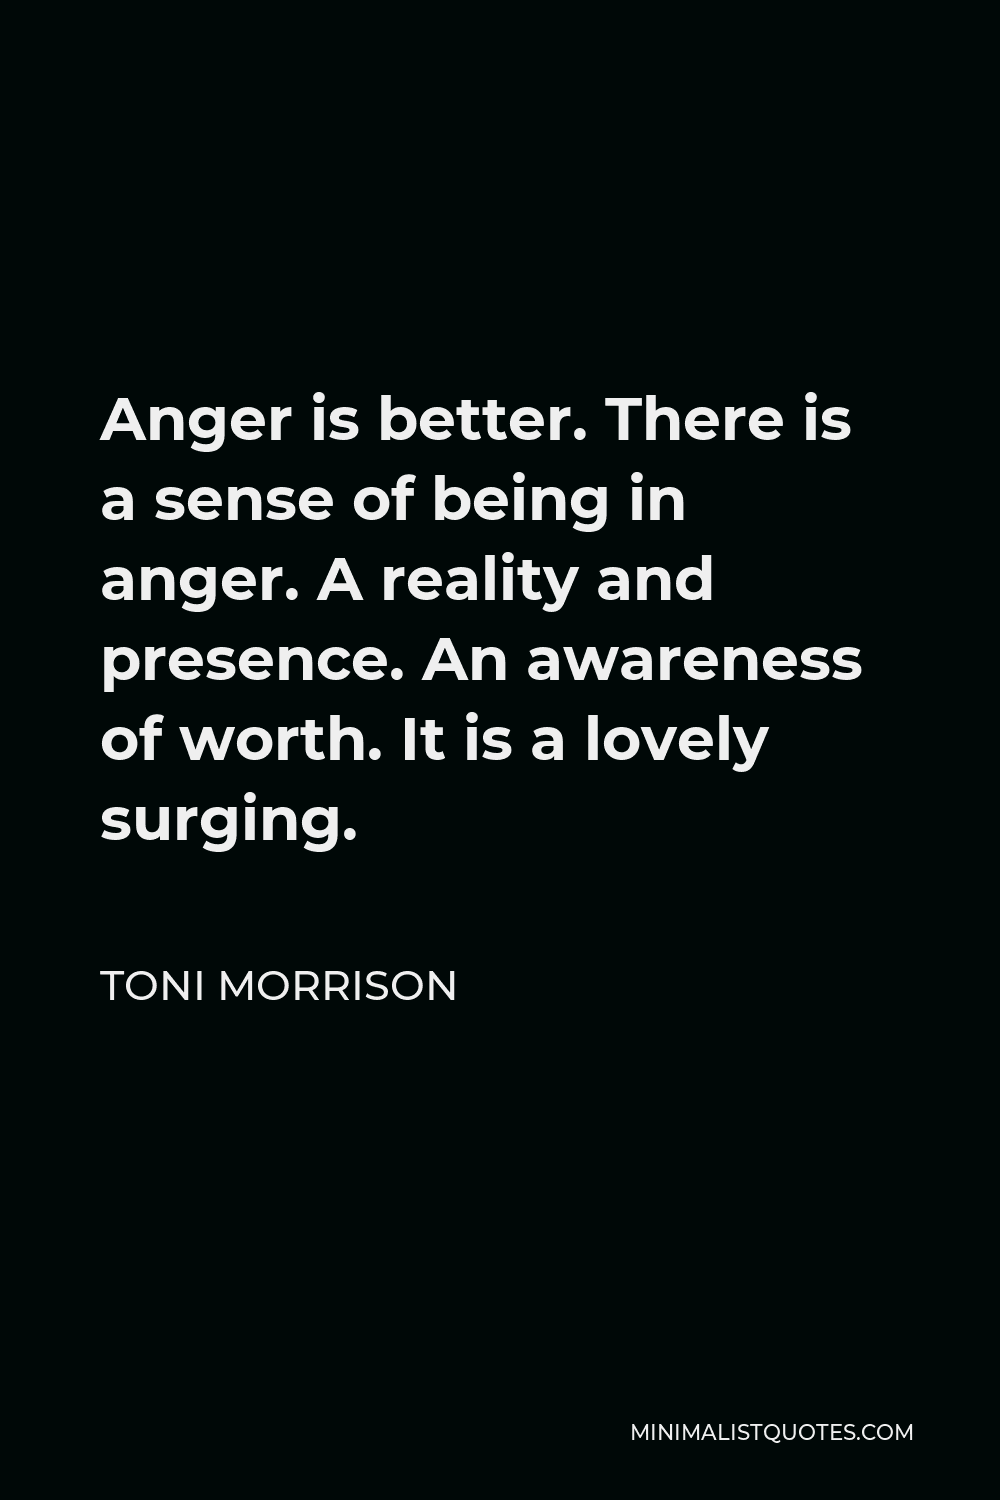 Toni Morrison Quote - Anger is better. There is a sense of being in anger. A reality and presence. An awareness of worth. It is a lovely surging.